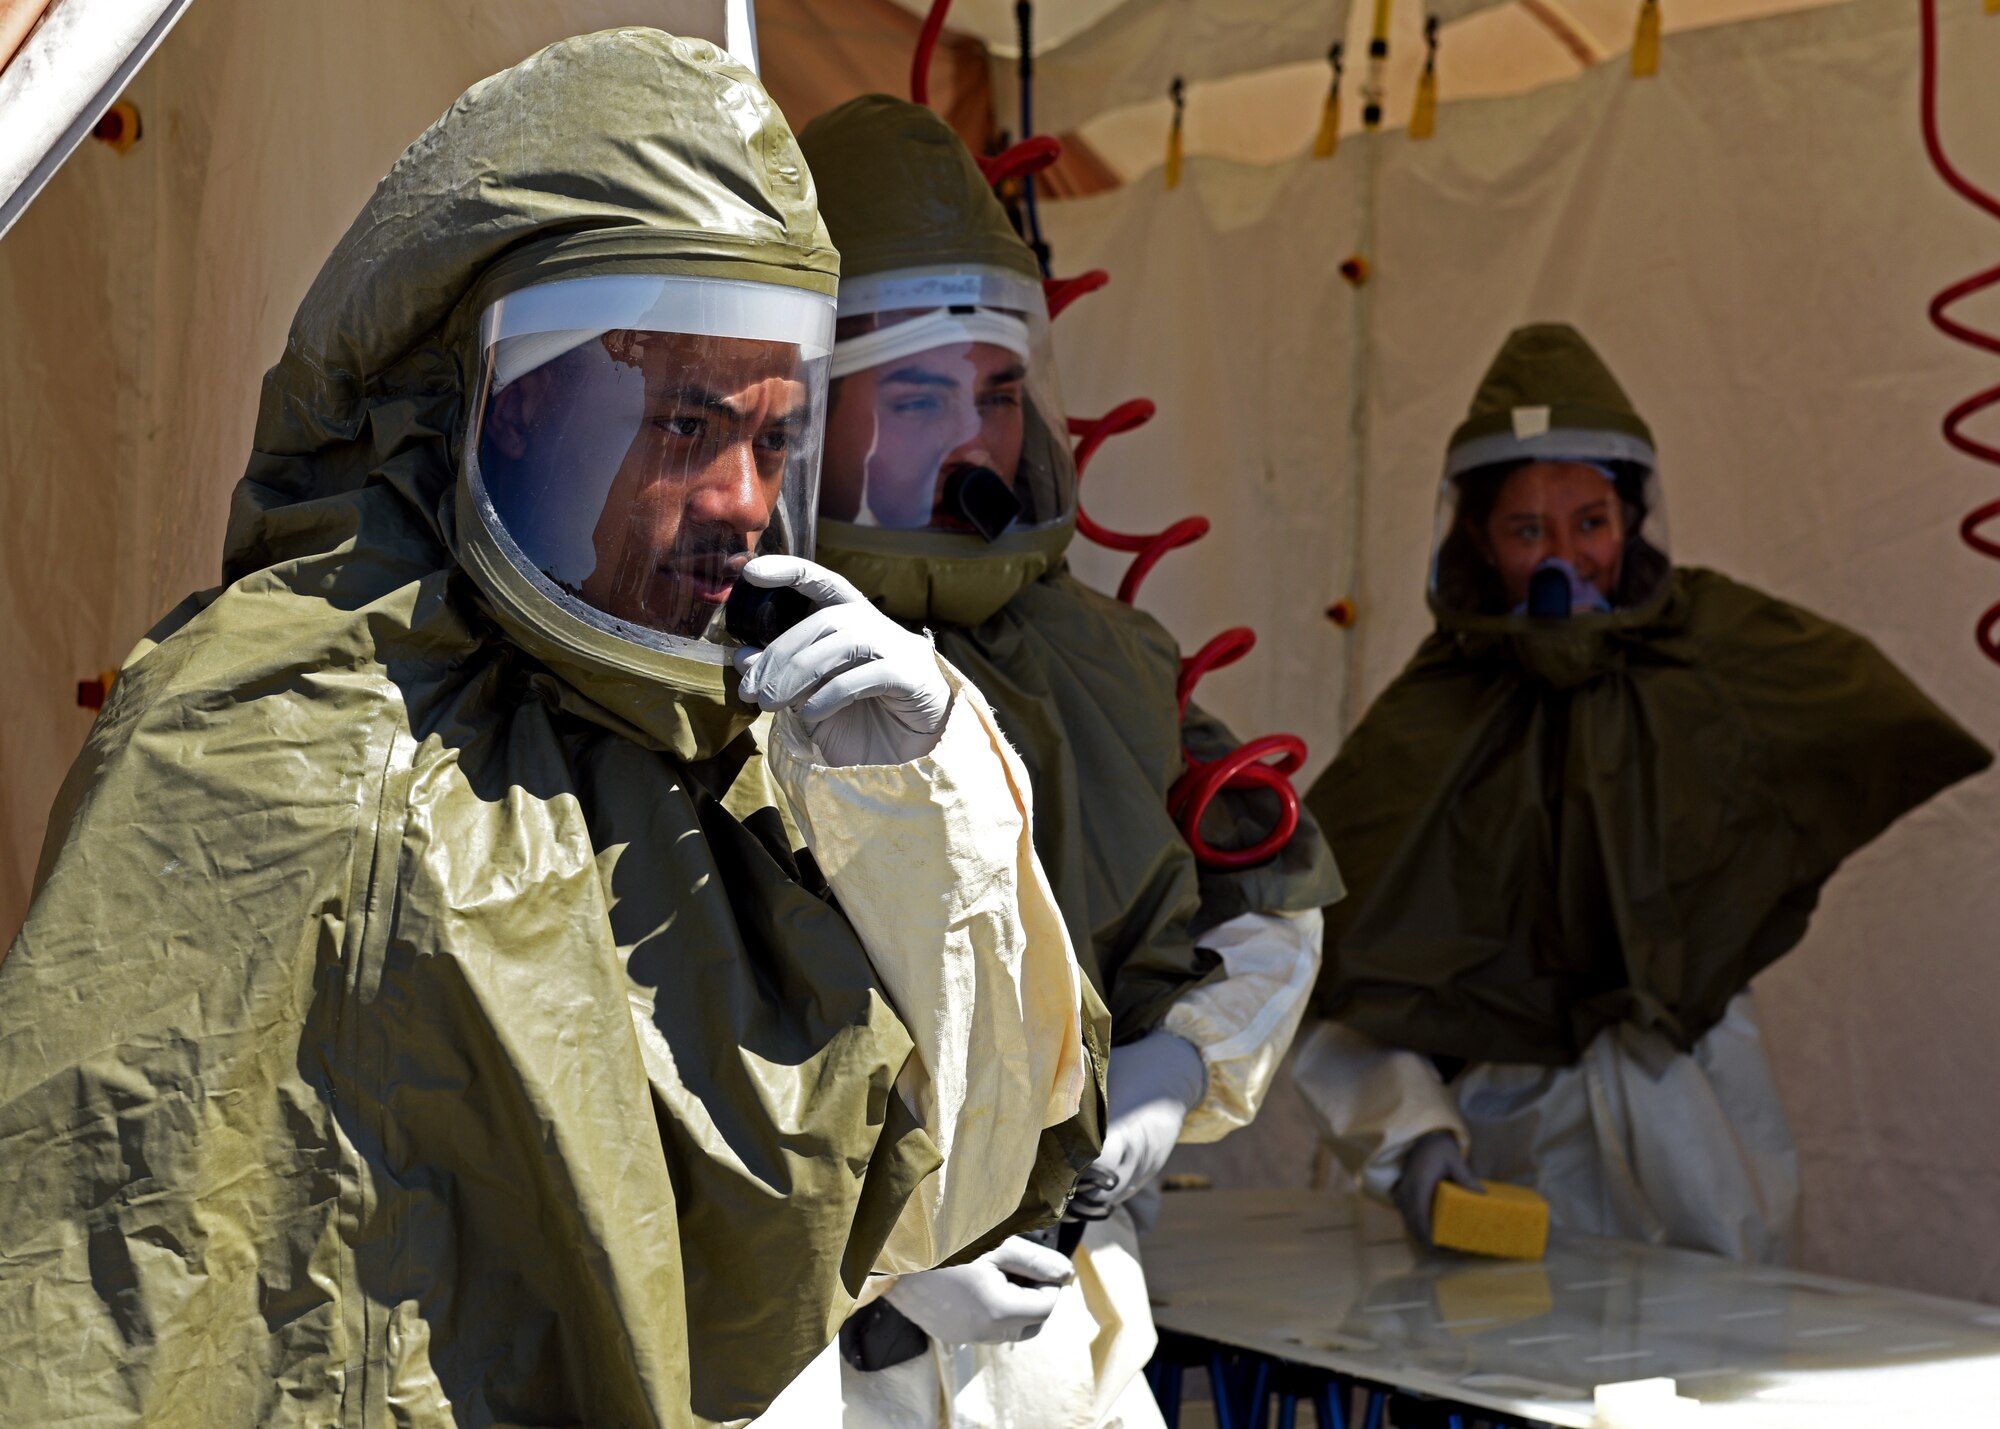 Personnel from the 17th Medical Group receive instructions during their medical in-place decontamination training at the Ross Clinic on Goodfellow Air Force Base, Texas, Sept. 12, 2019. Personnel train on how to properly don their protective gear and how to communicate to disinfect their patients. (U.S. Air Force photo by Airman 1st Class Robyn Hunsinger)